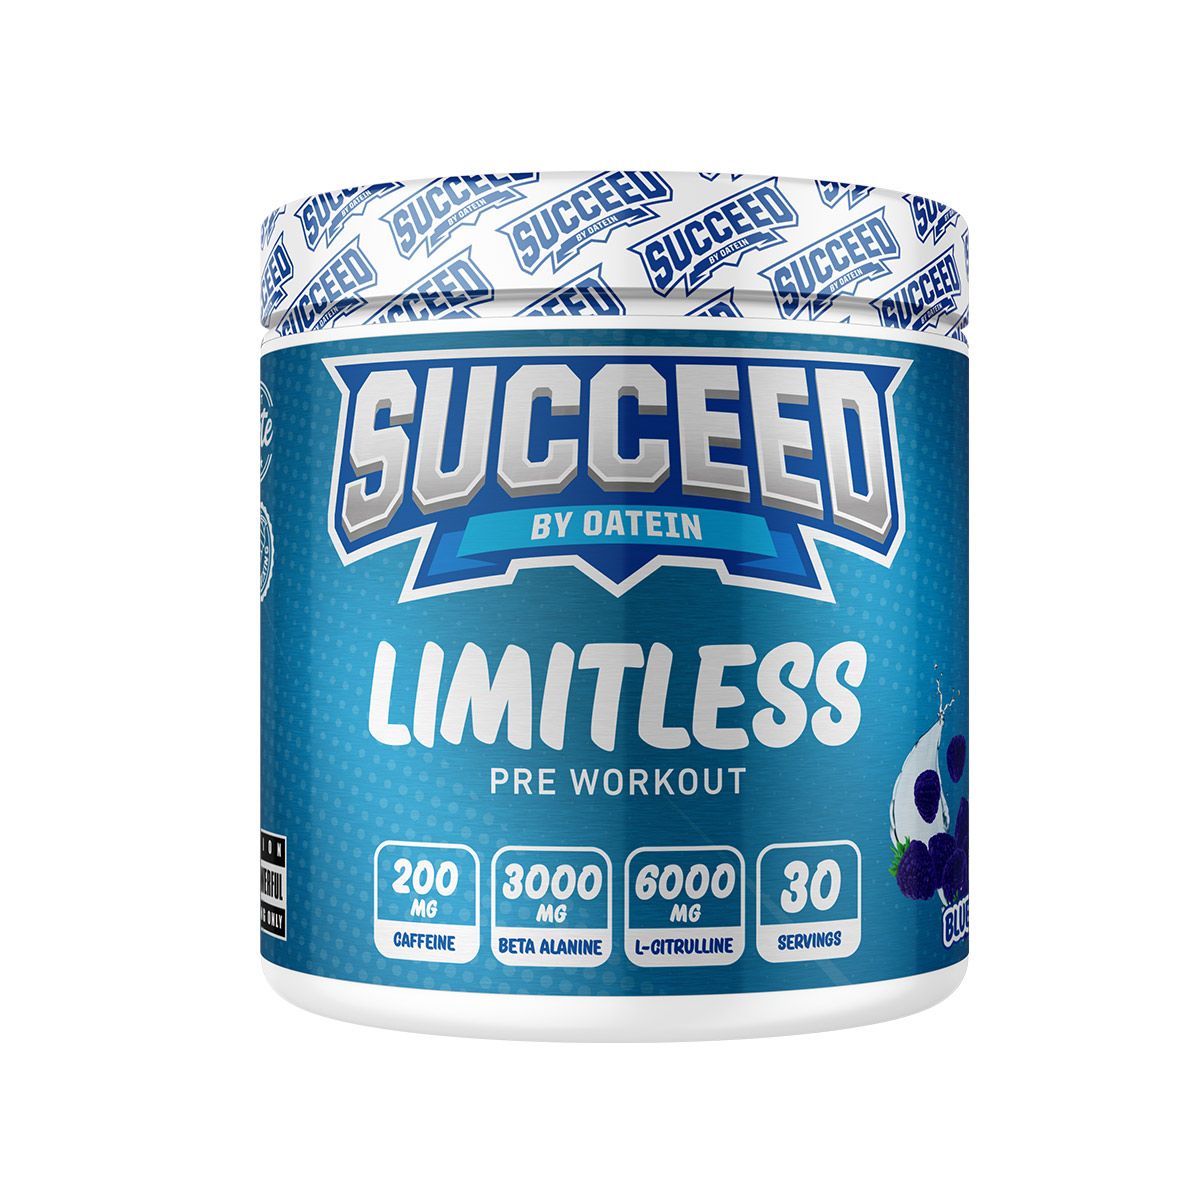 Oatein Succeed Limitless Pre-Workout - Blue Raspberry 360g